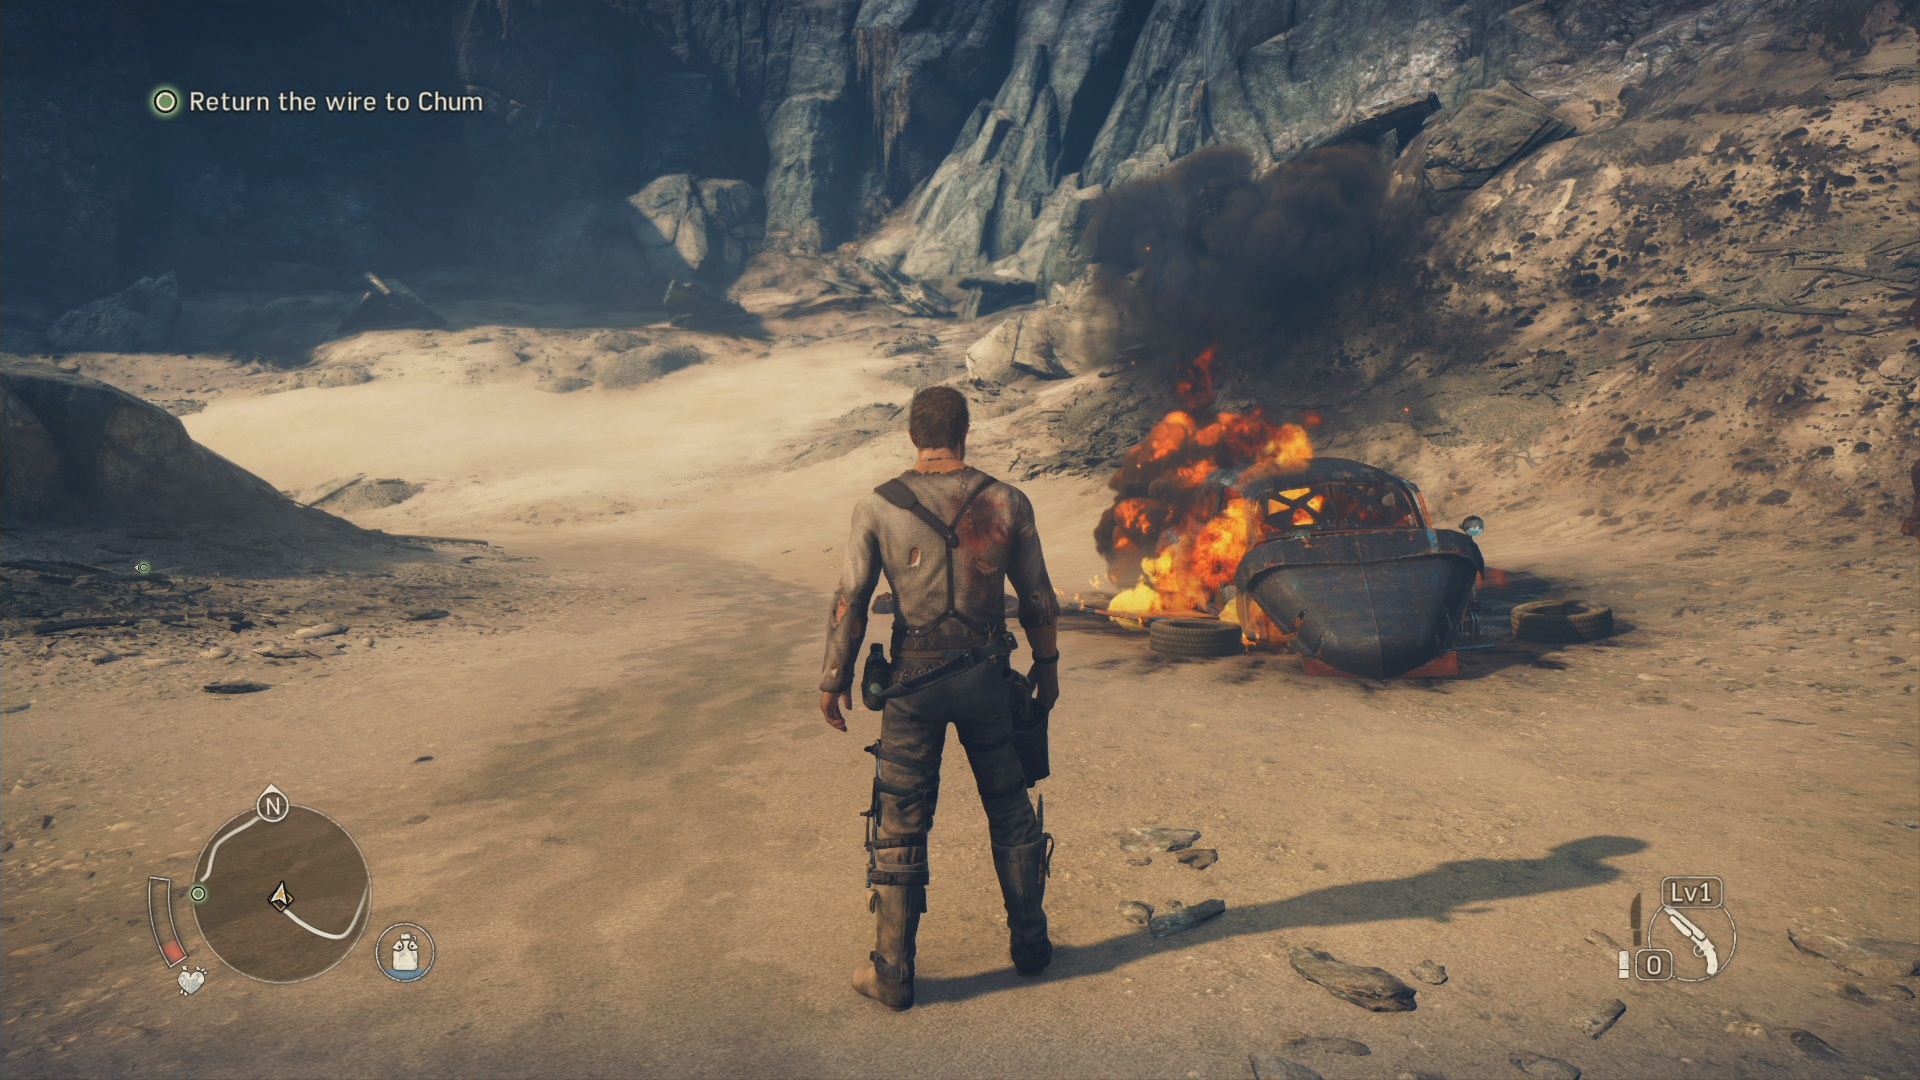 mad max xbox one